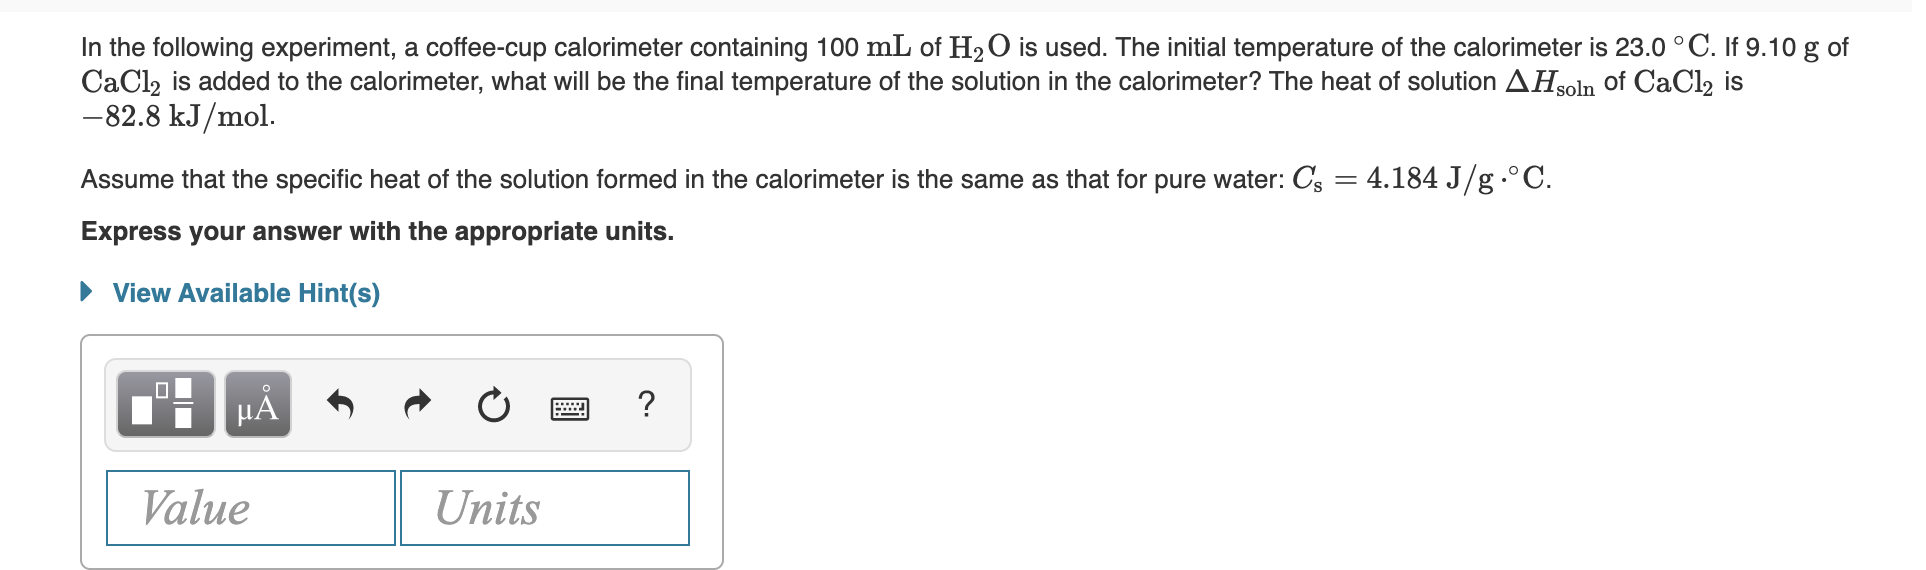 In the following experiment, a coffee-cup calorimeter containing 100 mL of H2O is used. The initial temperature of the calorimeter is 23.0 ° C. If 9.10 g of
CaCl, is added to the calorimeter, what will be the final temperature of the solution in the calorimeter? The heat of solution AHsoln of CaCl, is
-82.8 kJ/mol.
Assume that the specific heat of the solution formed in the calorimeter is the same as that for pure water: Cs = 4.184 J/g.°C.
Express your answer with the appropriate units.
• View Available Hint(s)
HA
Value
Units
